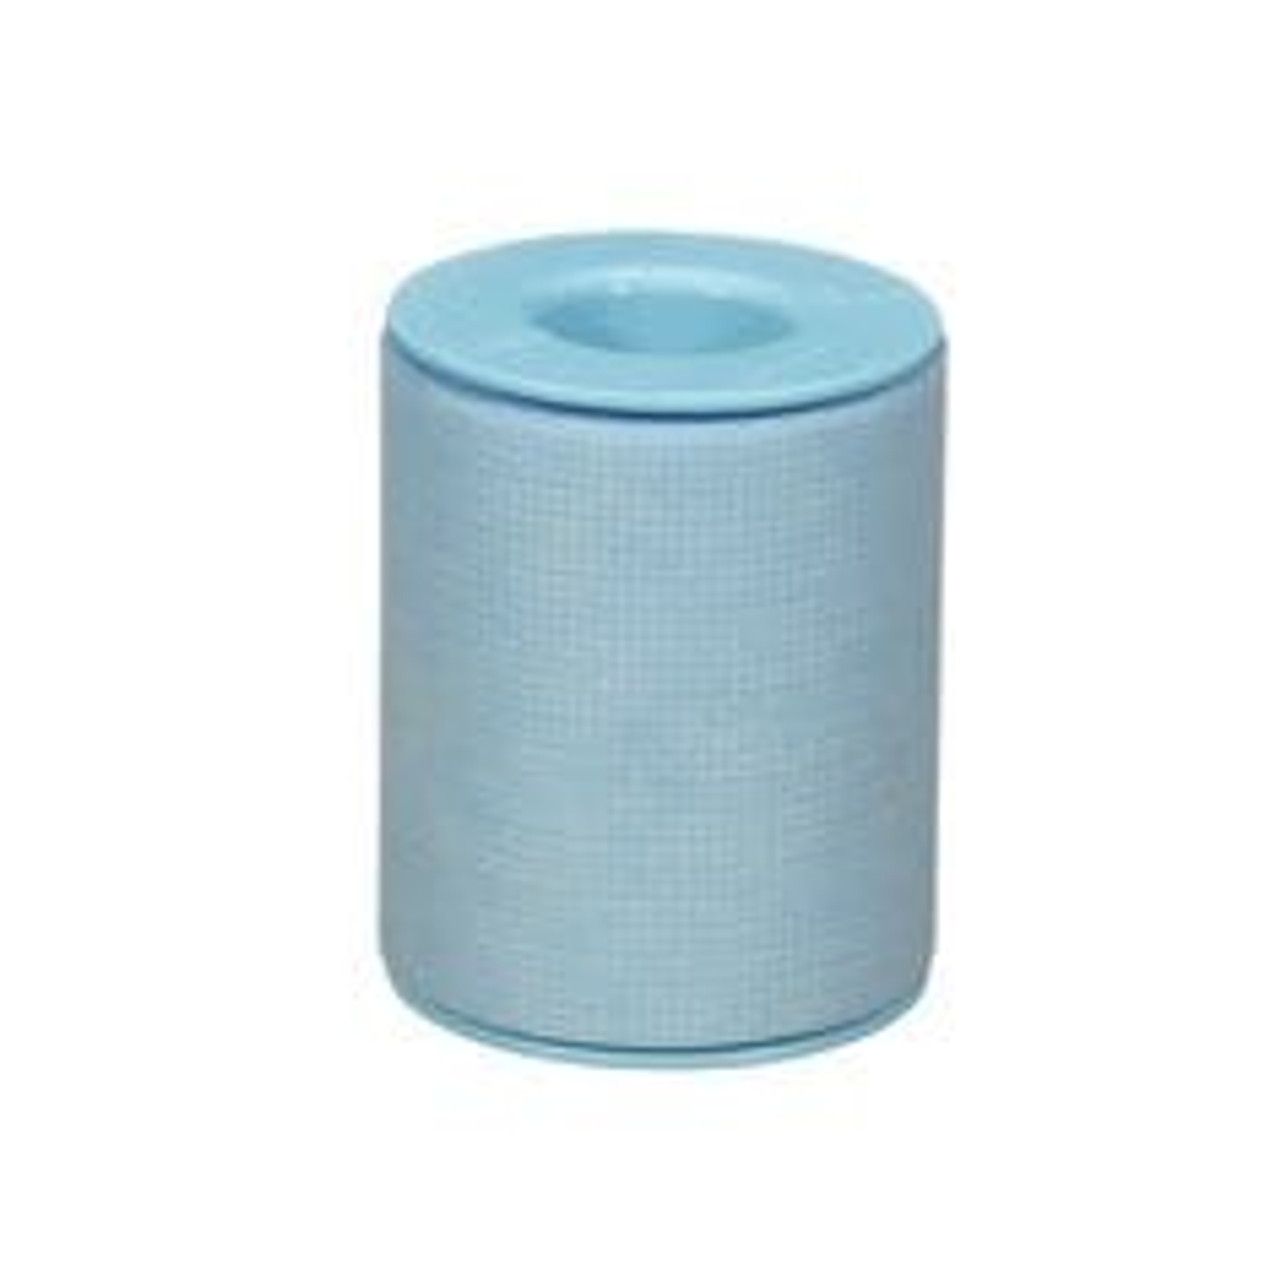 3M Micropore S Surgical Tape, 2770-2, 2 inch x 5.5 Yard (2.5 cm 5m), 6 Rolls/Box, 10 Boxes/Case 85238 Industrial Products & Supplies